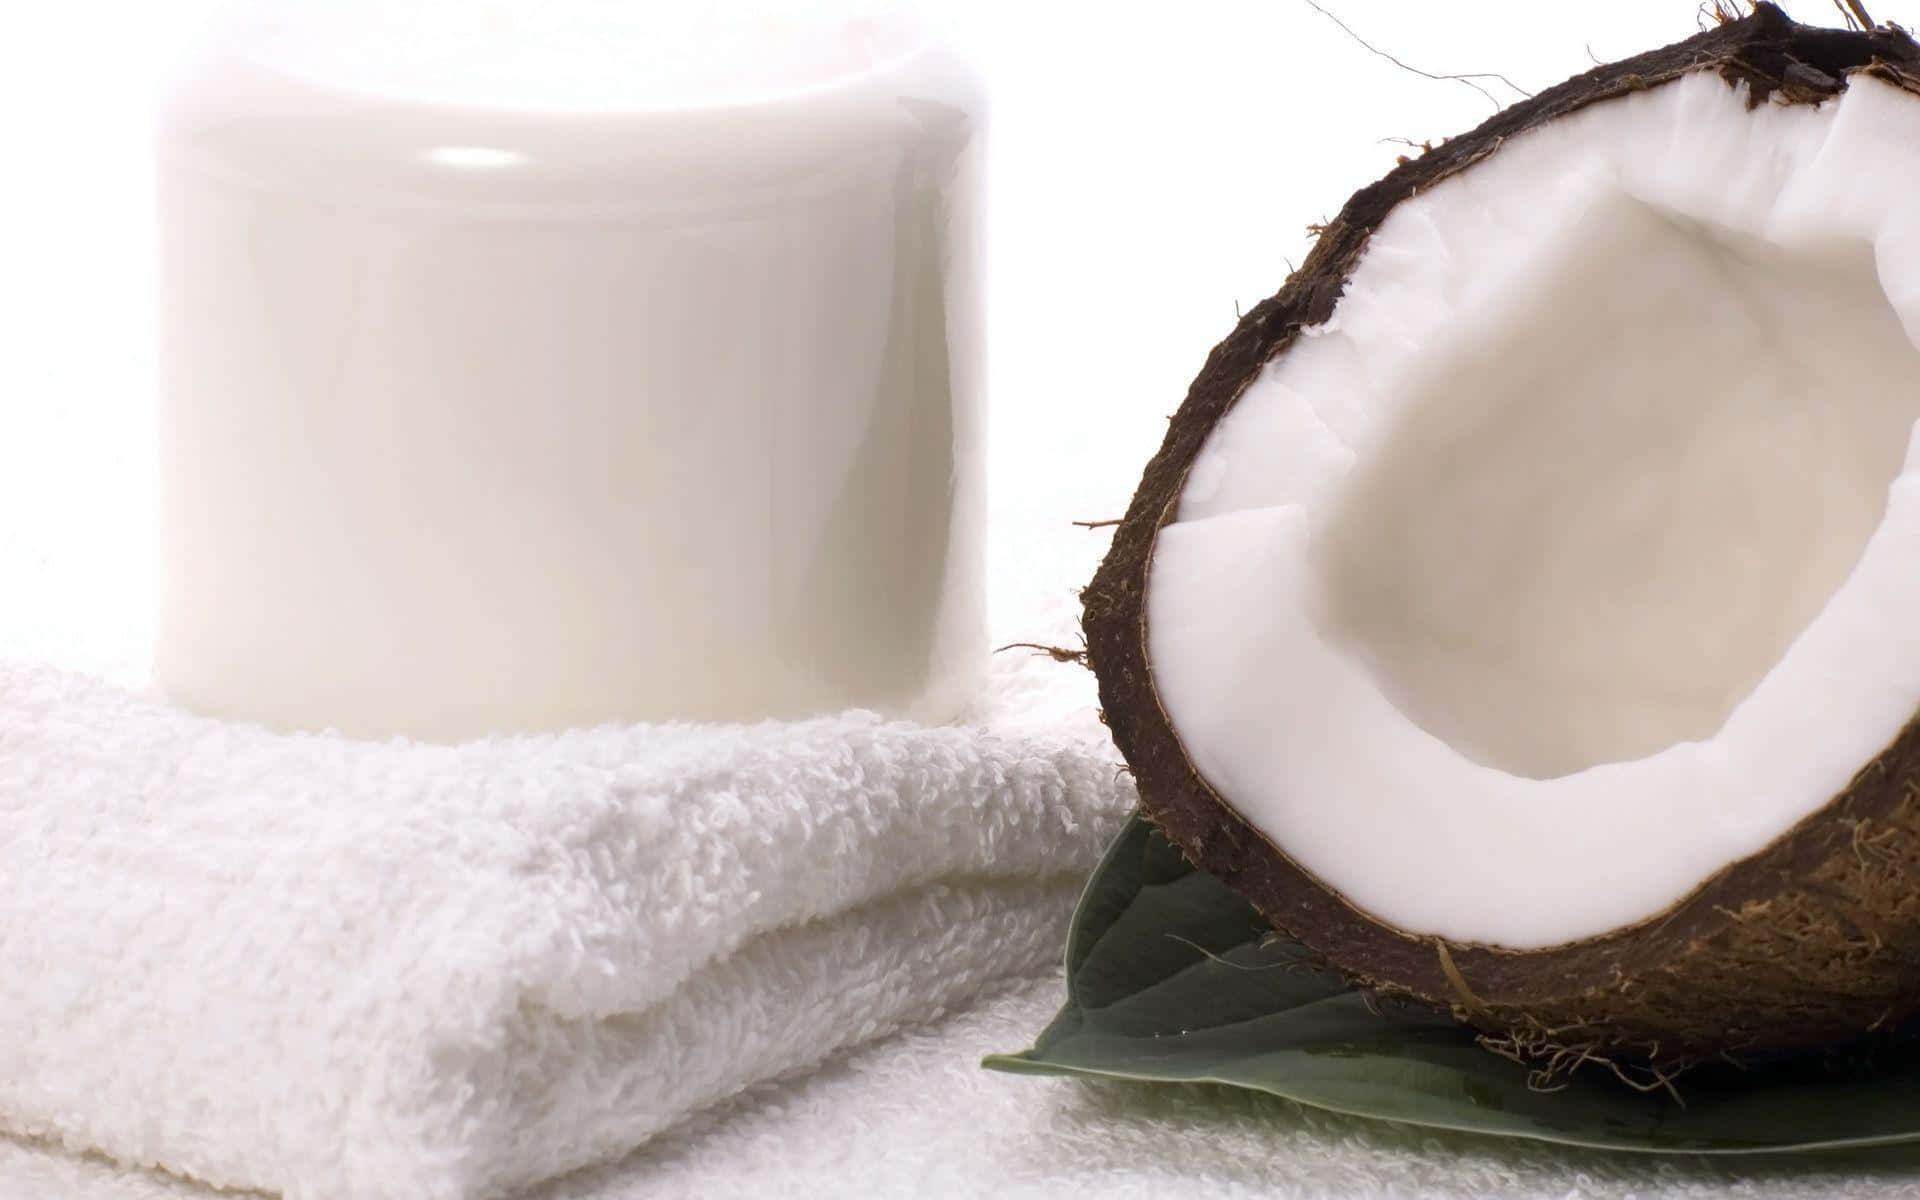 Searching for some cool Coconut Fuel?